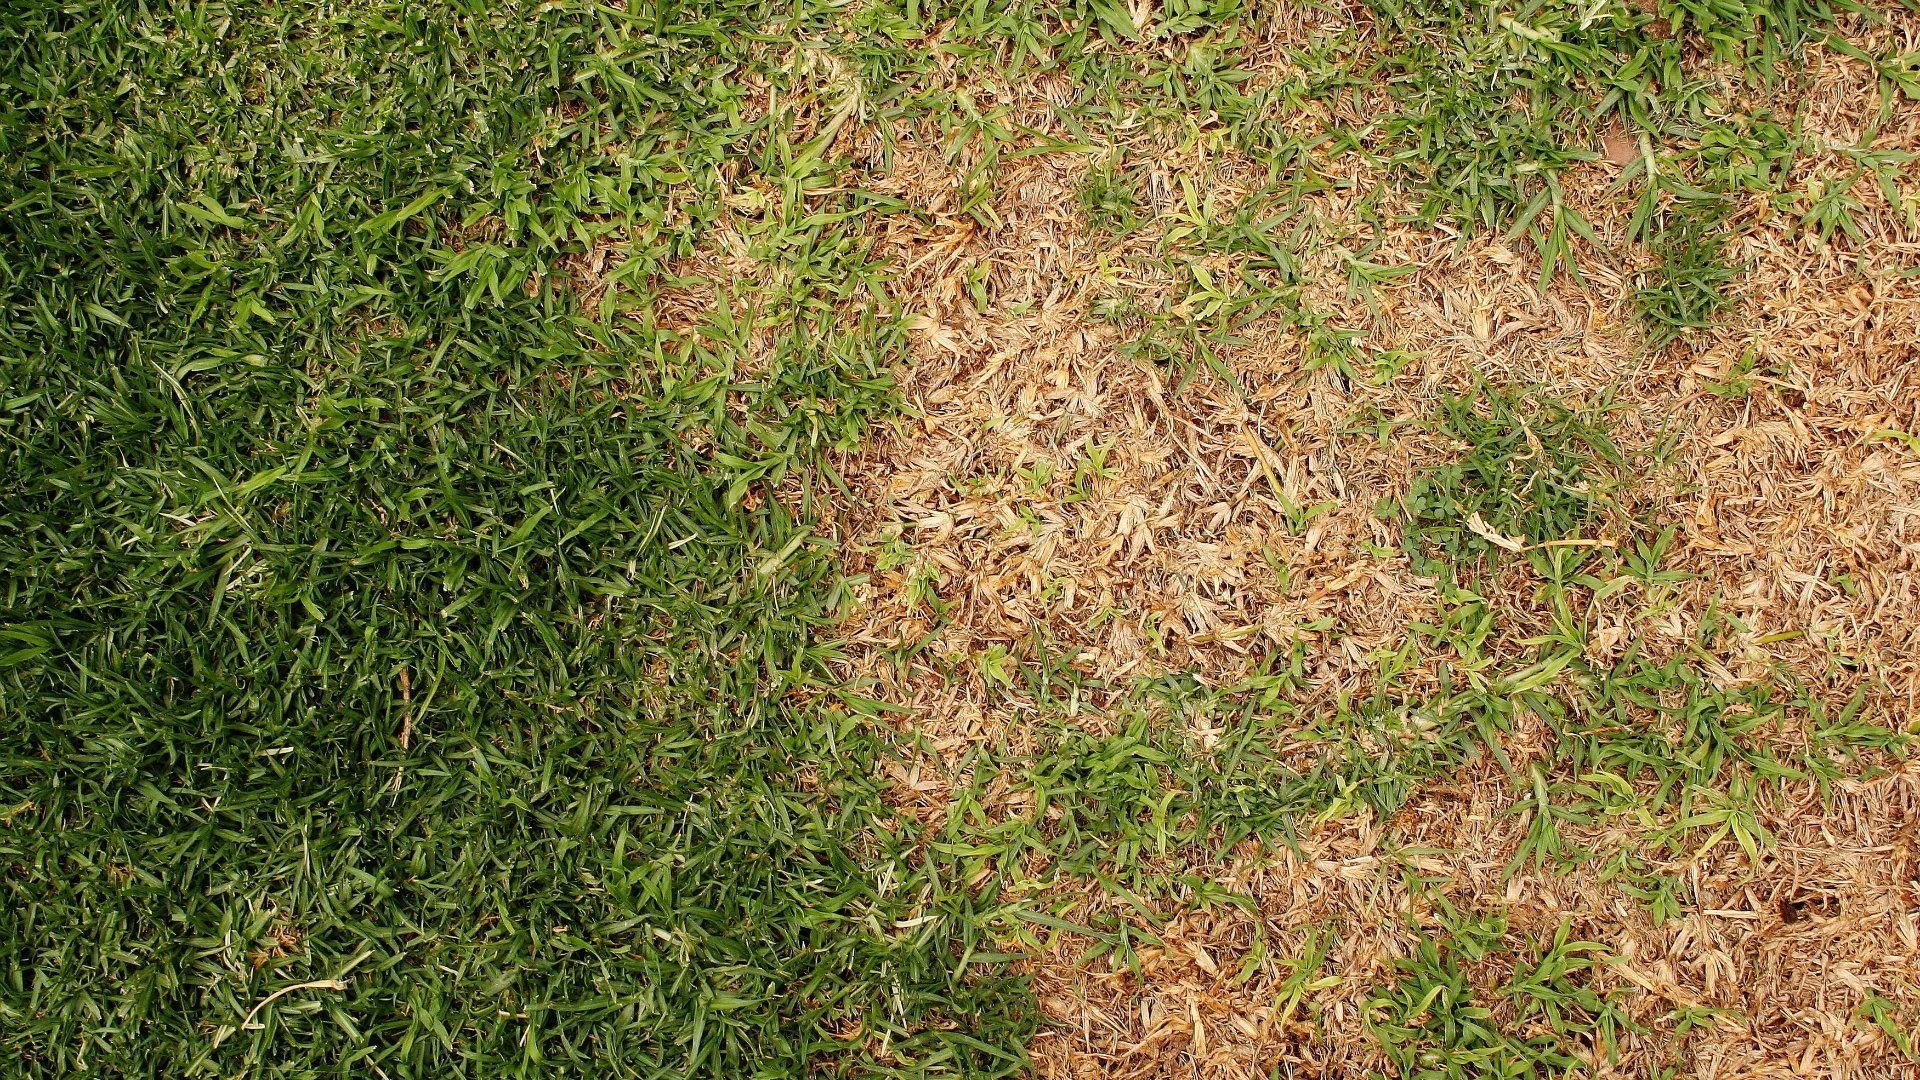 Is Your Lawn Battling a Turf Disease? Here’s What You Need To Do